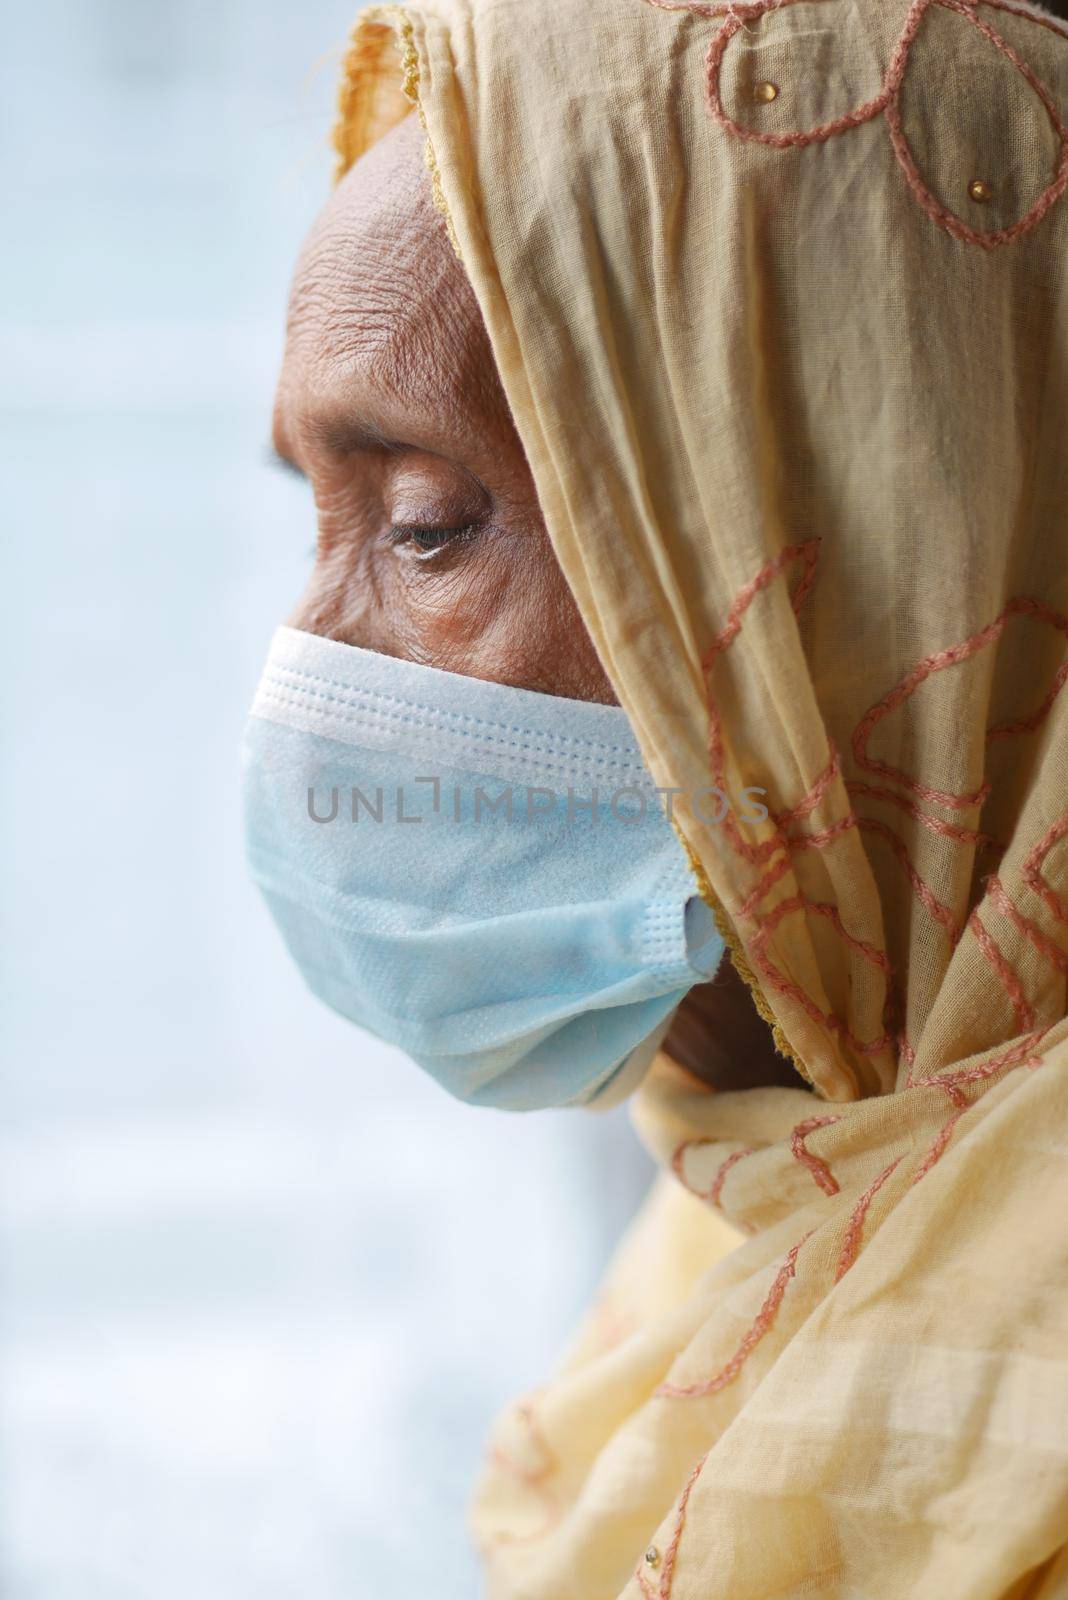 portrait of an old woman wearing a surgical mask,